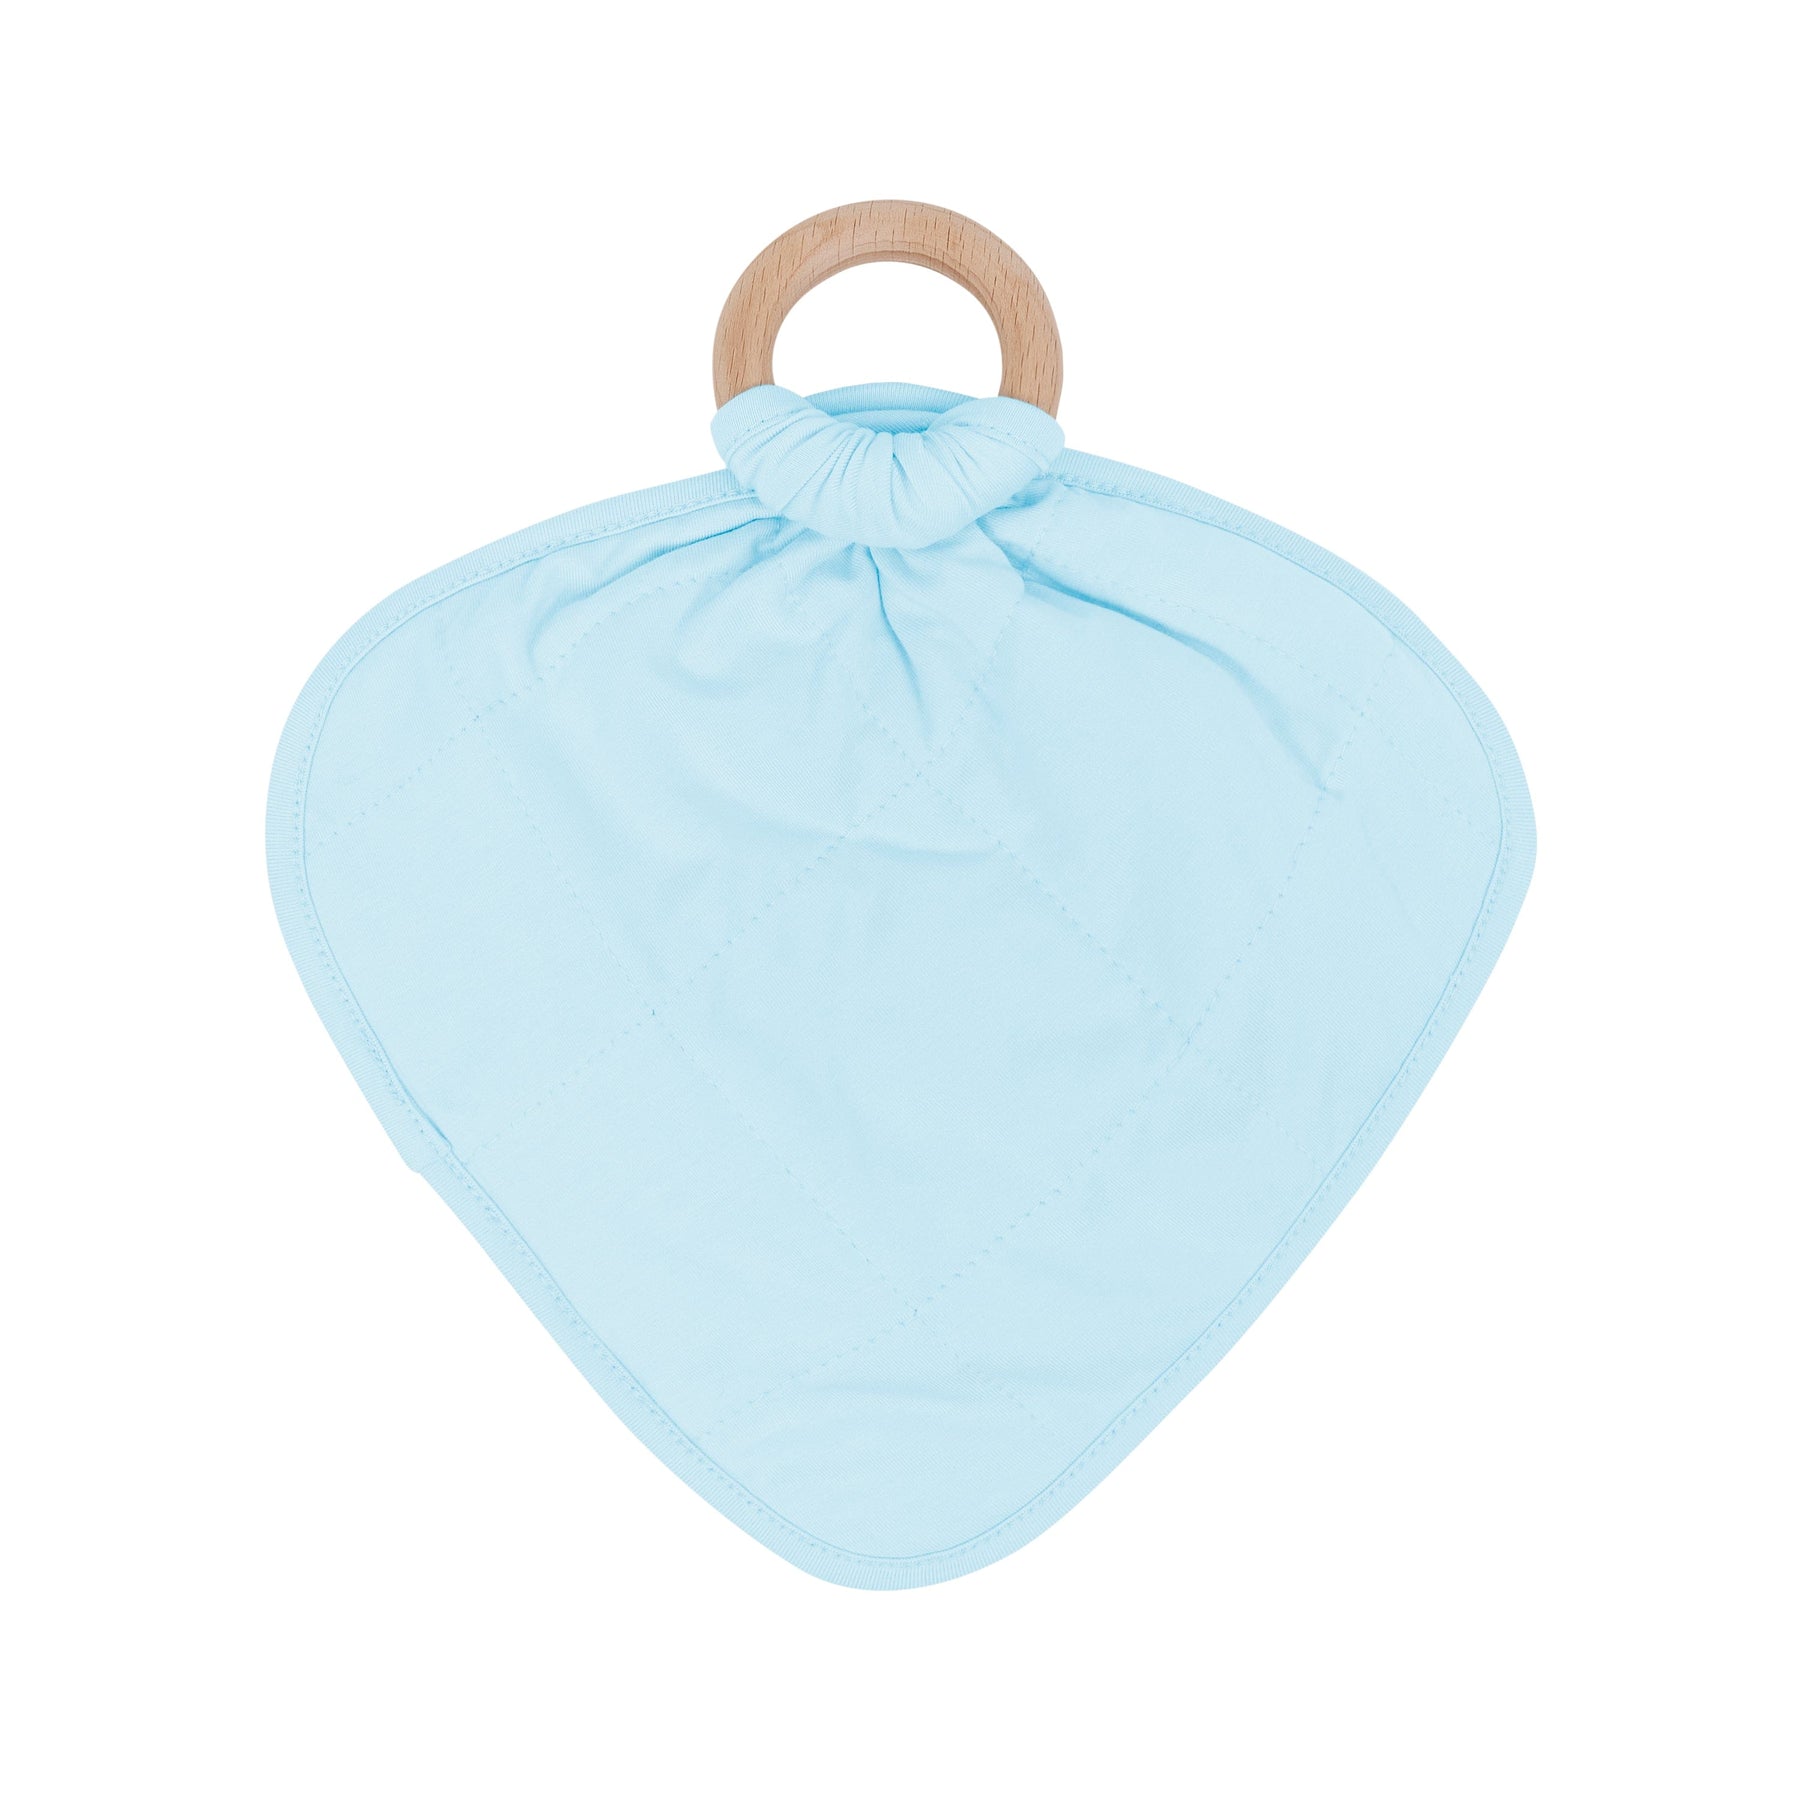 Kyte Baby Lovey Powder / Infant Lovey in Powder with Removable Wooden Teething Ring